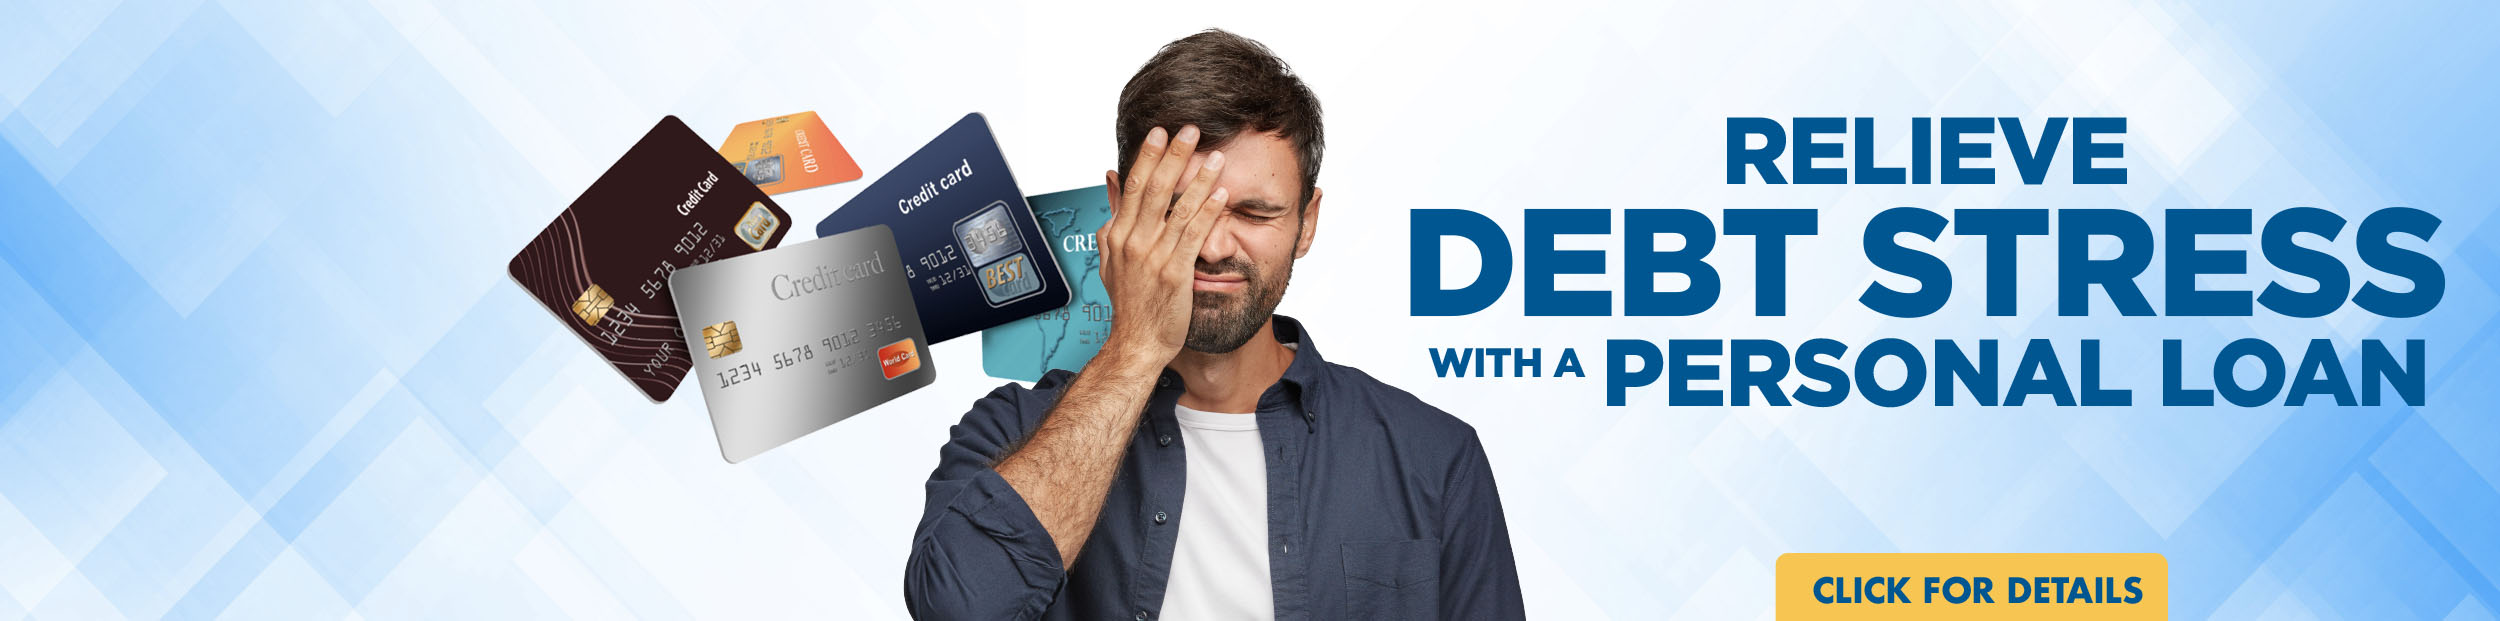 Adult male with his head in his hands surrounded by credit cards.